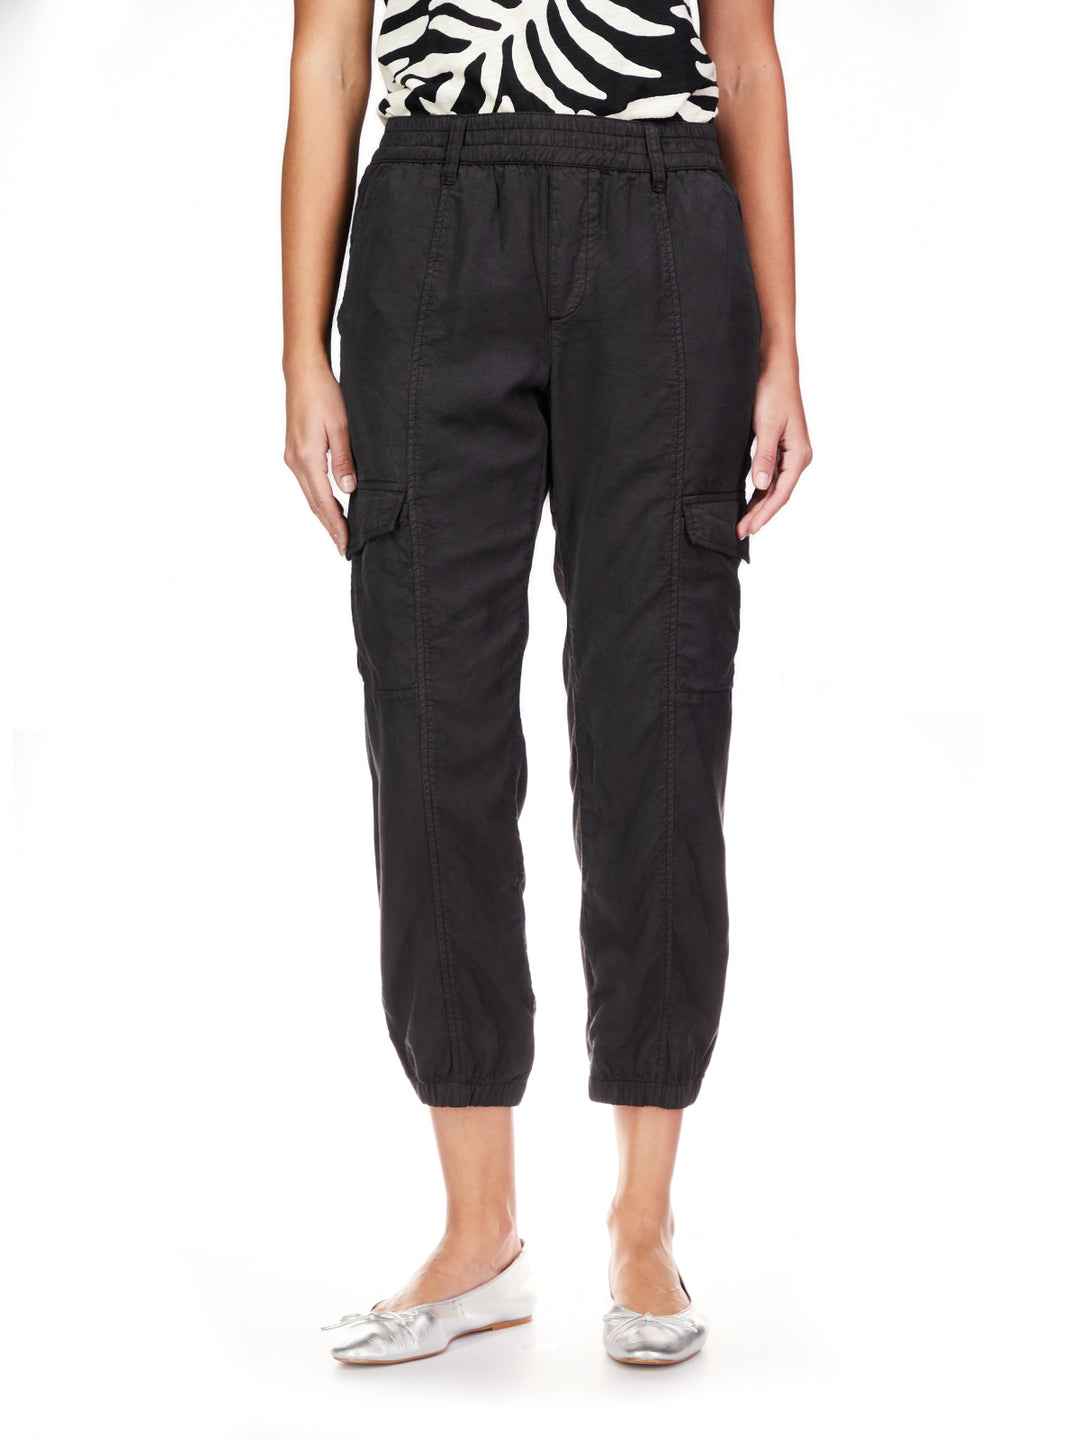 RELAXED REBEL PANT-BLACK - Kingfisher Road - Online Boutique